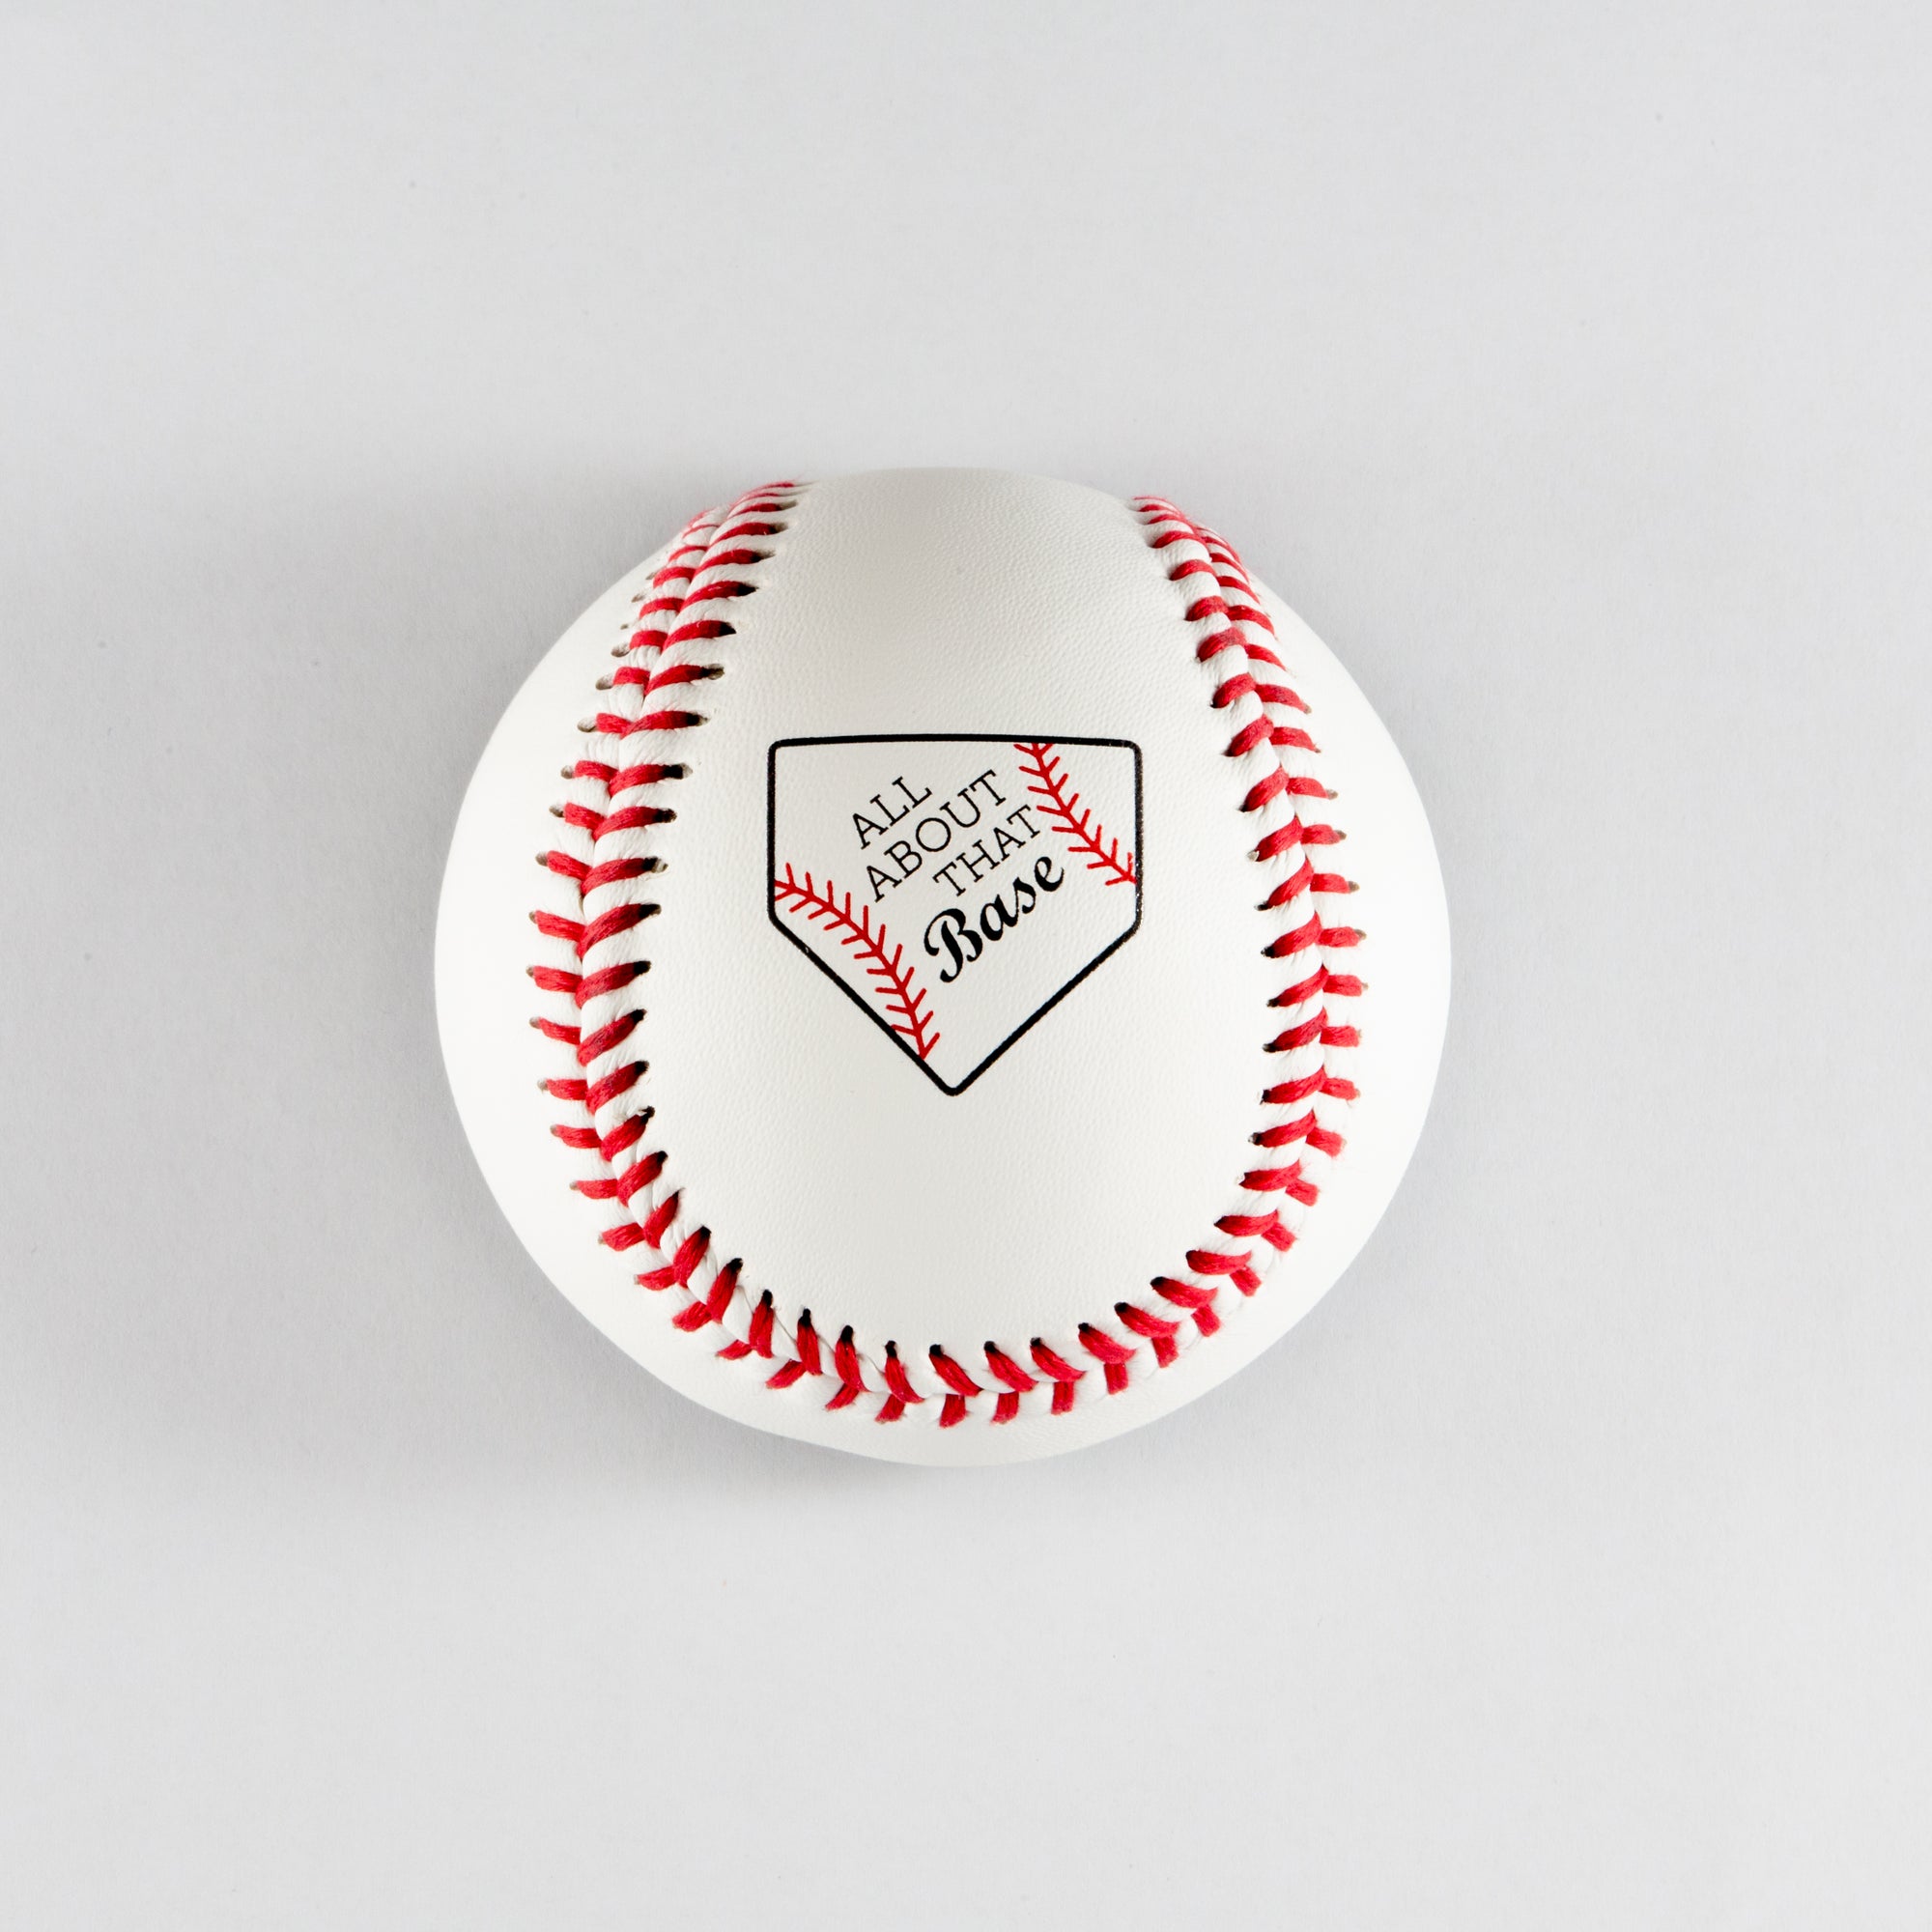 Printed Baseball with All About That Base Design 